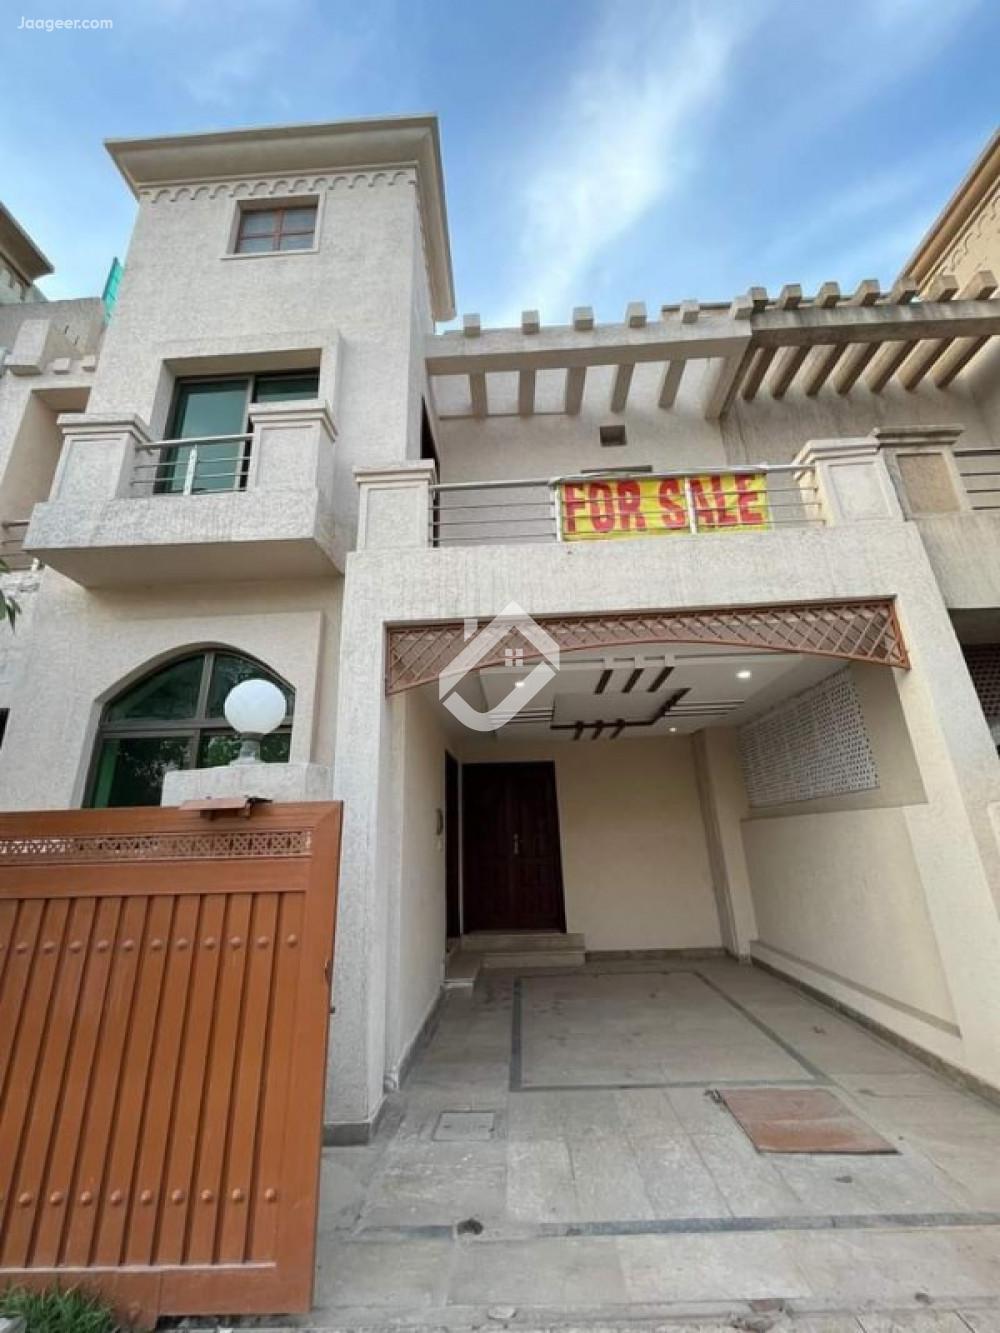 View  5.5 Marla Double Storey Stunning House For Sale In Bahria Town Phase-8  Block-Ali  in Bahria Town Phase-8, Rawalpindi